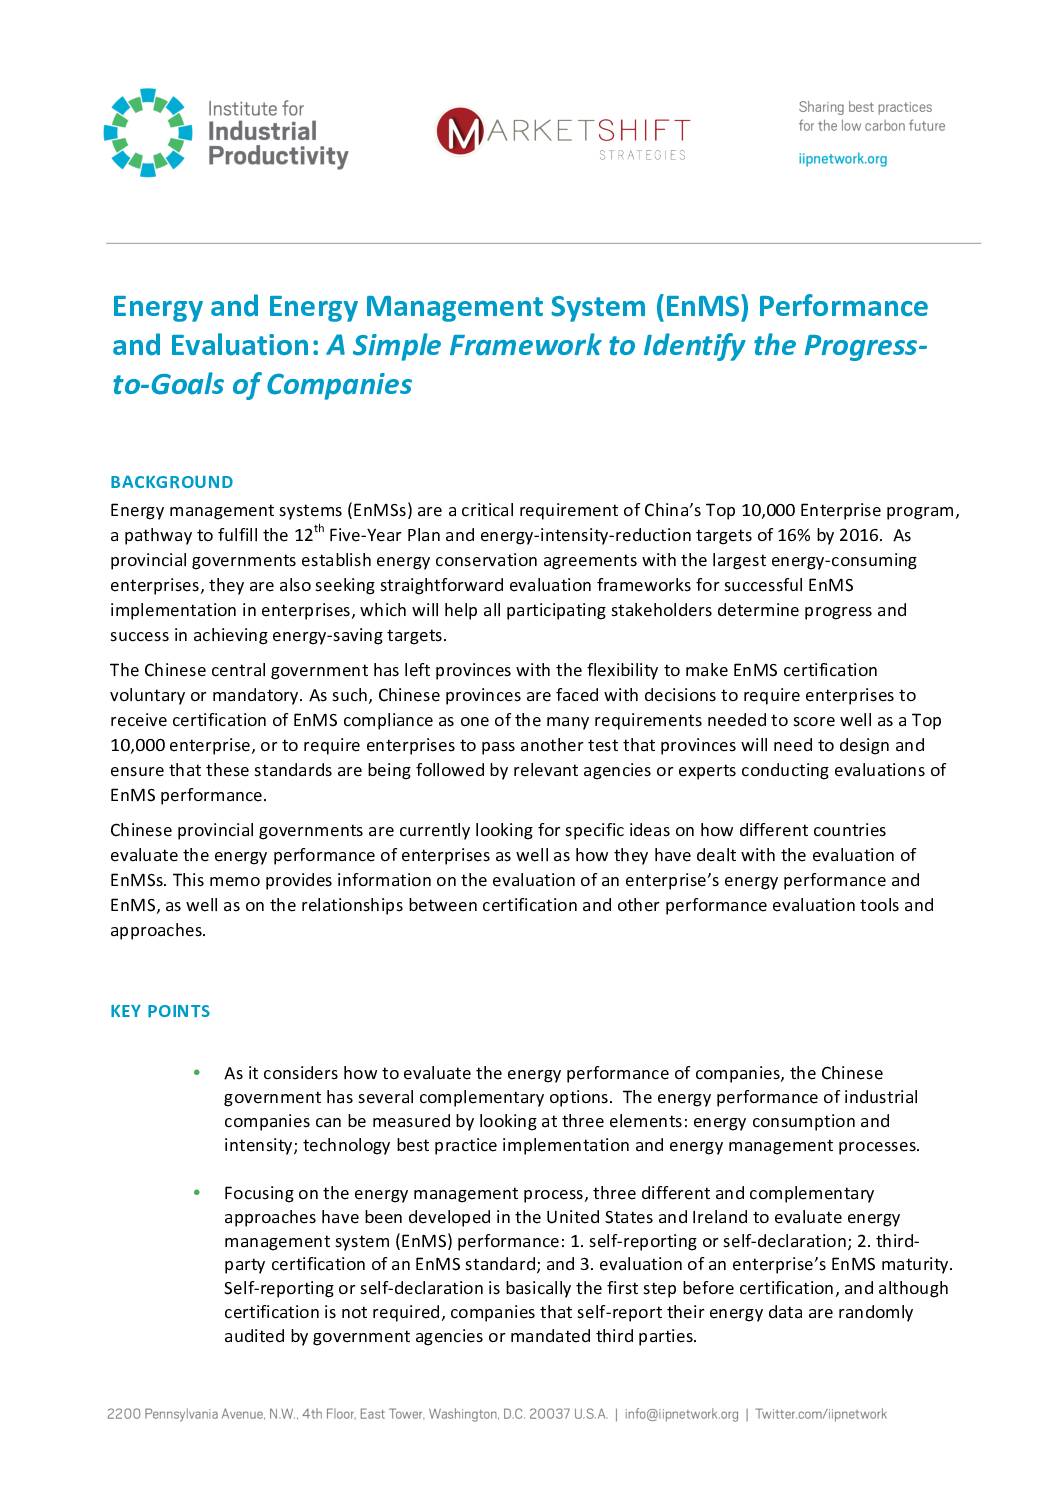 Energy and Energy Management System (EnMS) Performance and Evaluation: A Simple Framework to Identify the Progress-to-Goals of Companies